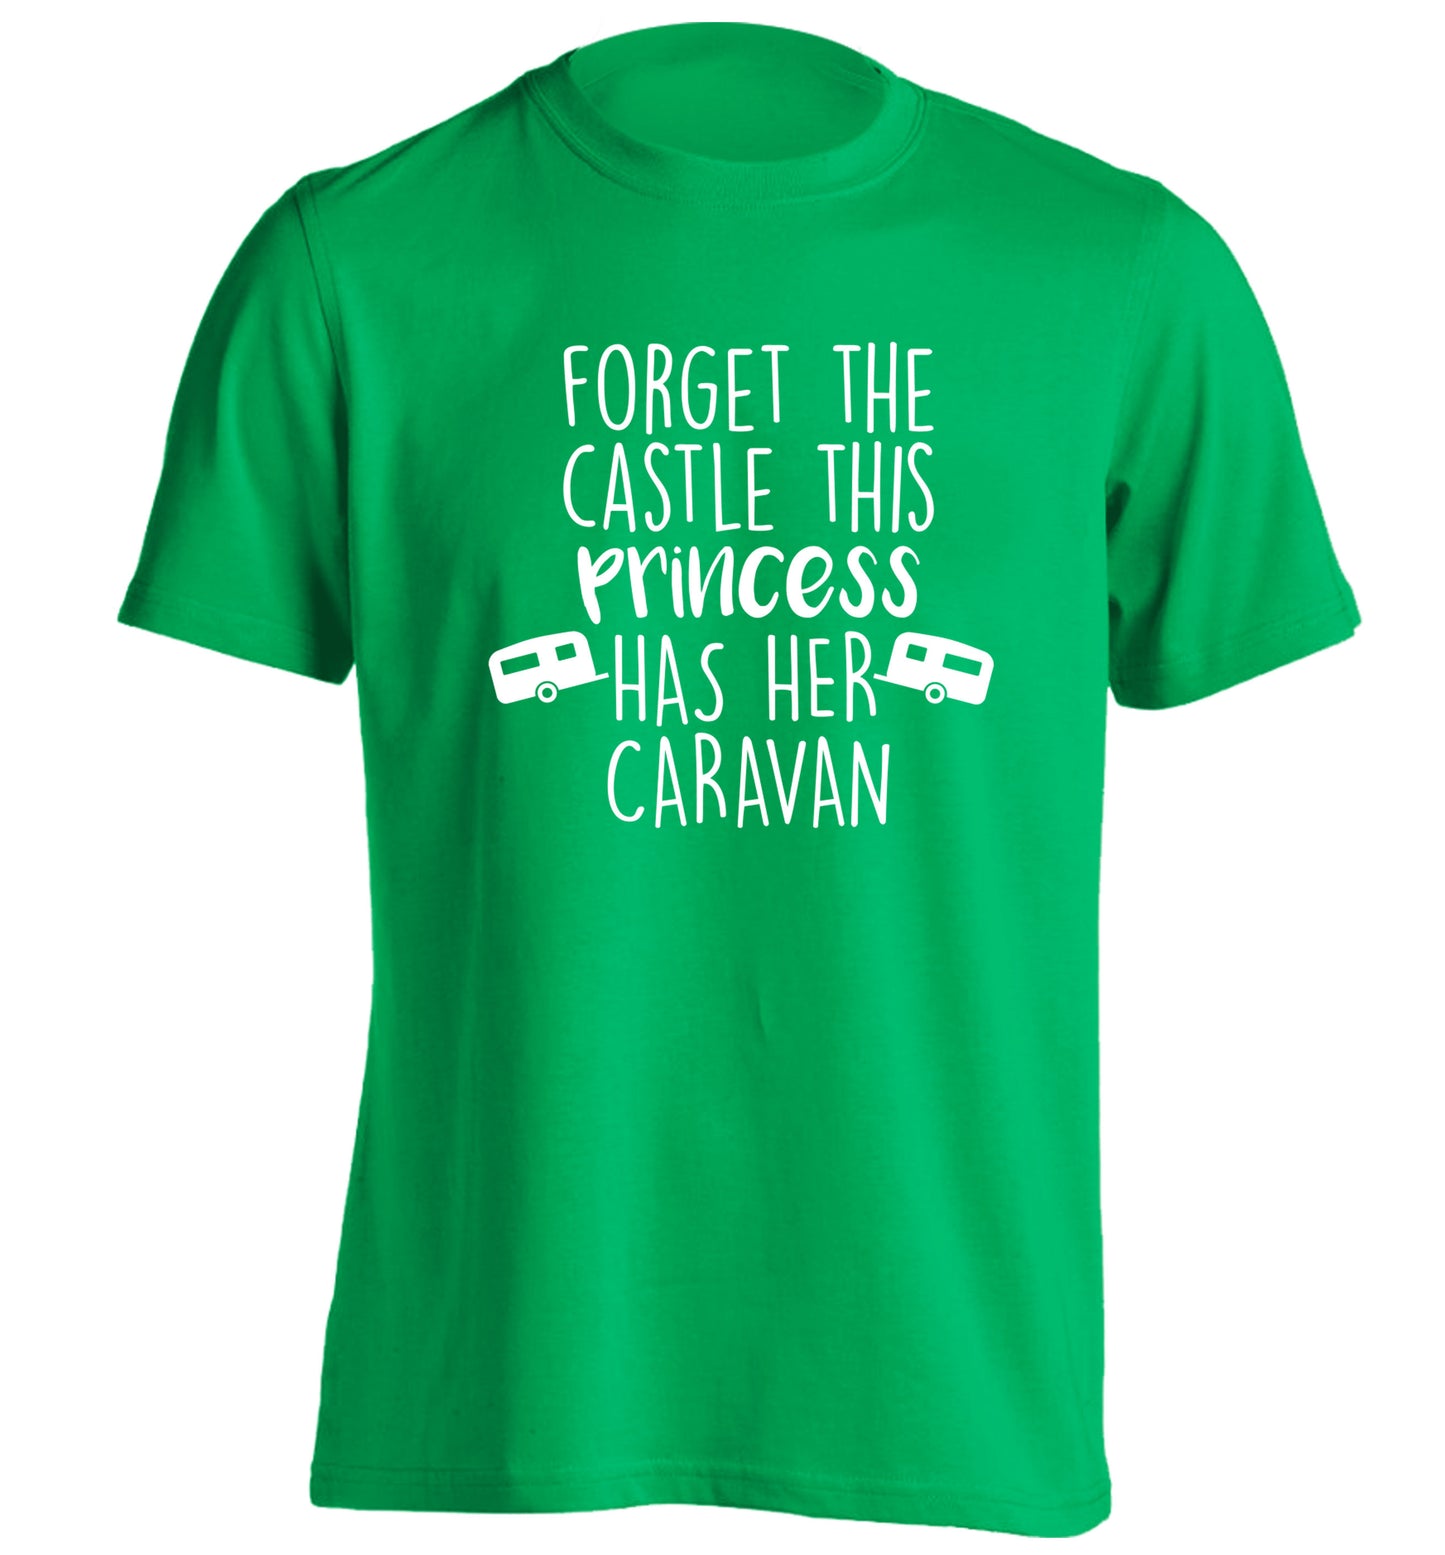 Forget the castle this princess lives at the caravan adults unisex green Tshirt 2XL